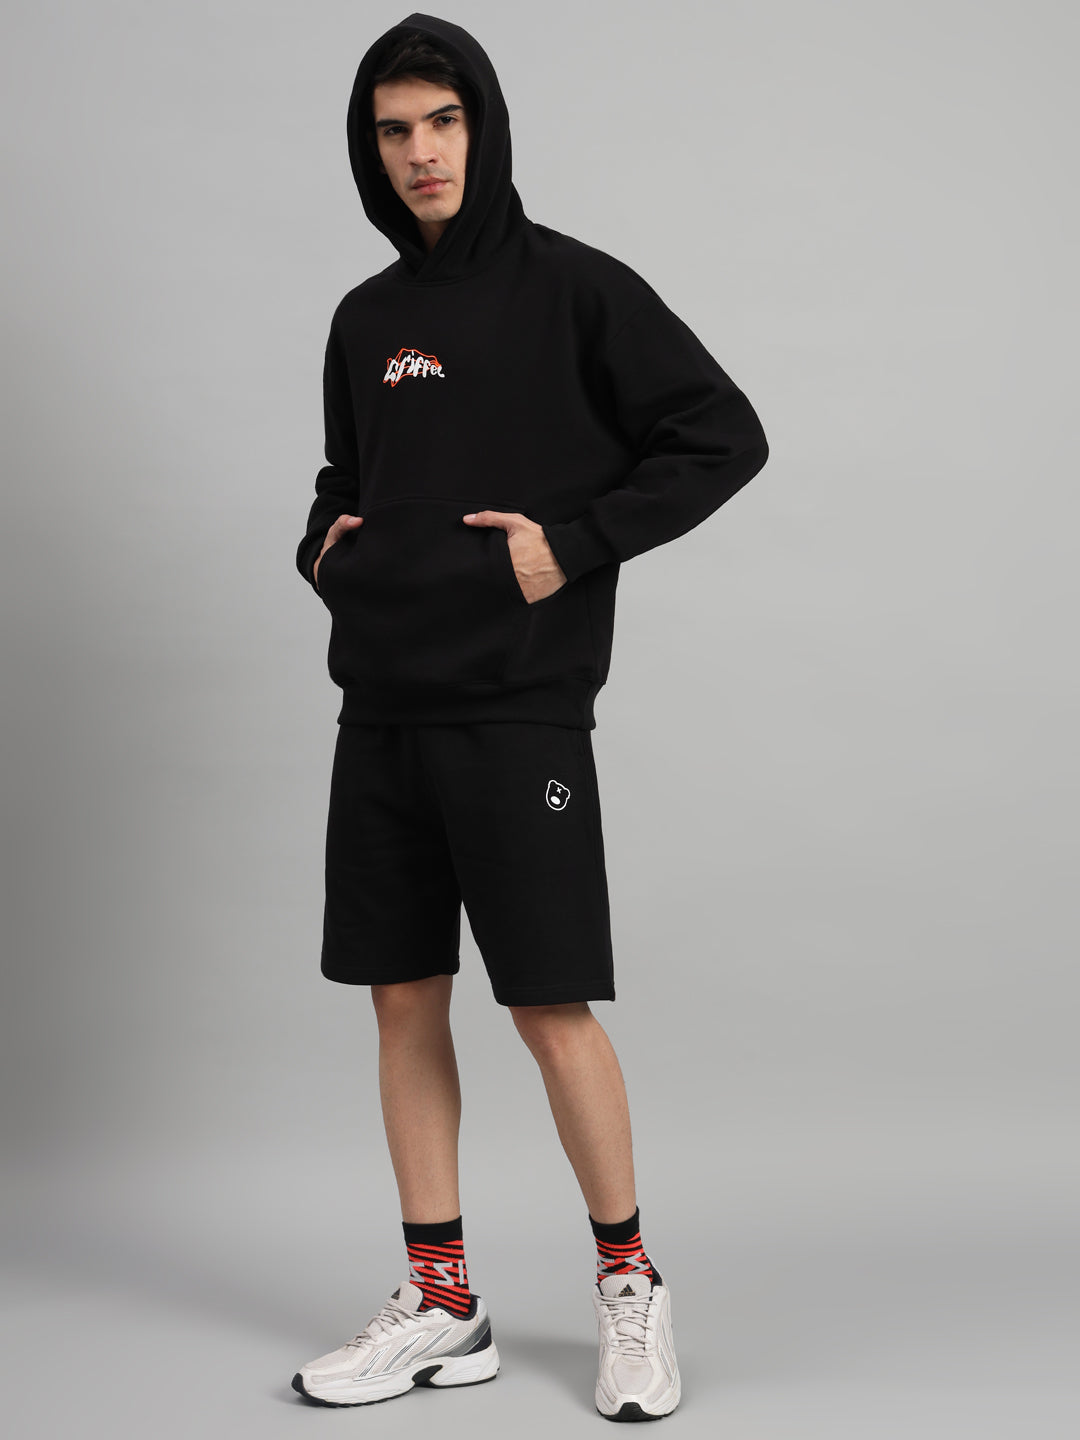 Griffel Men Oversized ONE HUNDRED % LOYAL Back Print 100% Cotton Black Fleece Hoodie and Shorts - griffel